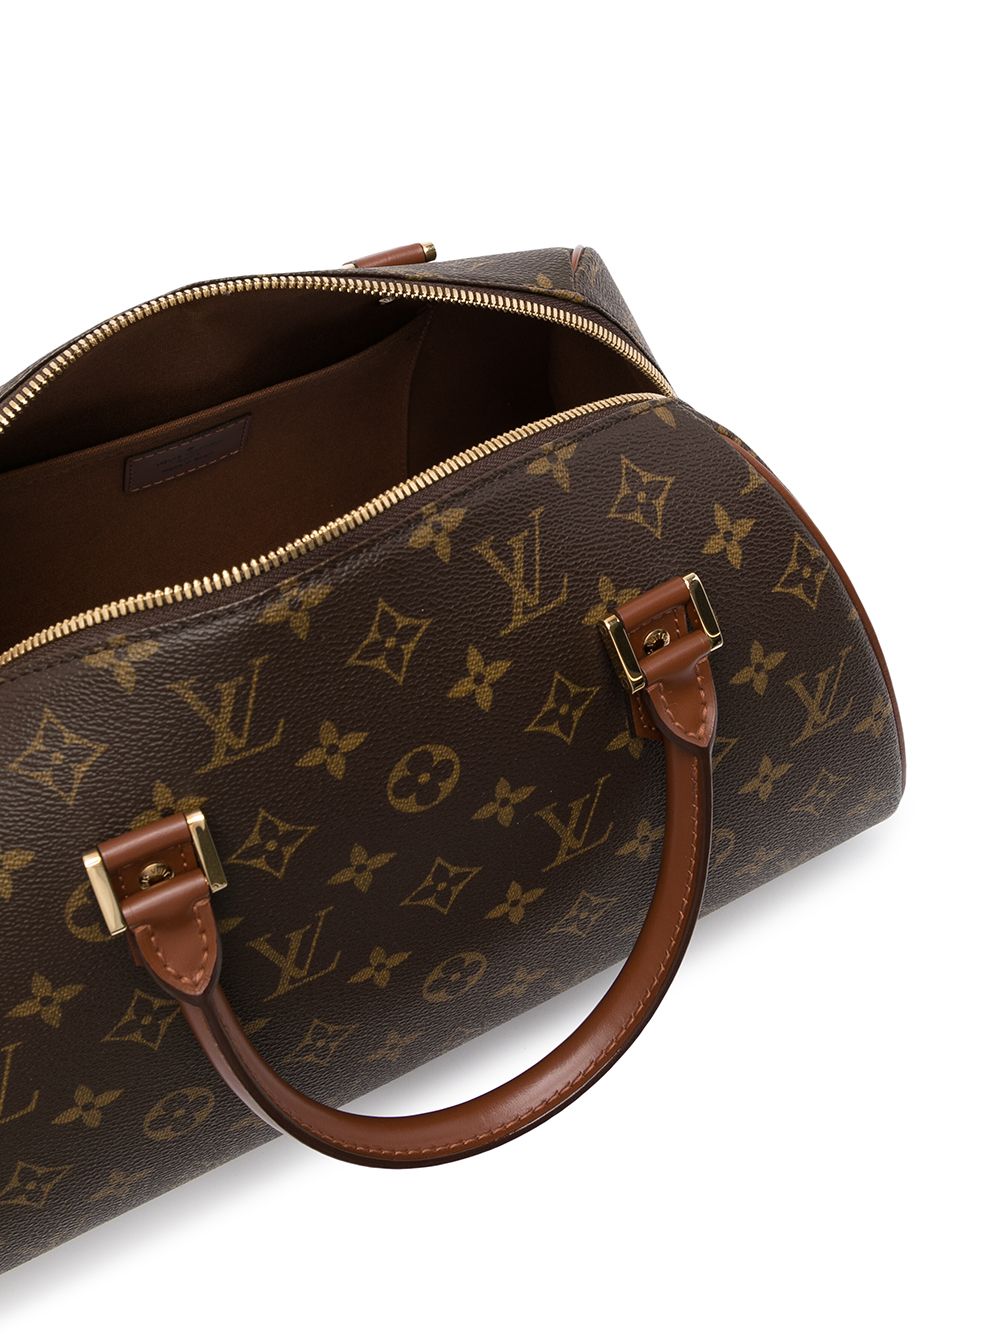 2004 Louis Vuitton Bags - 9 For Sale on 1stDibs